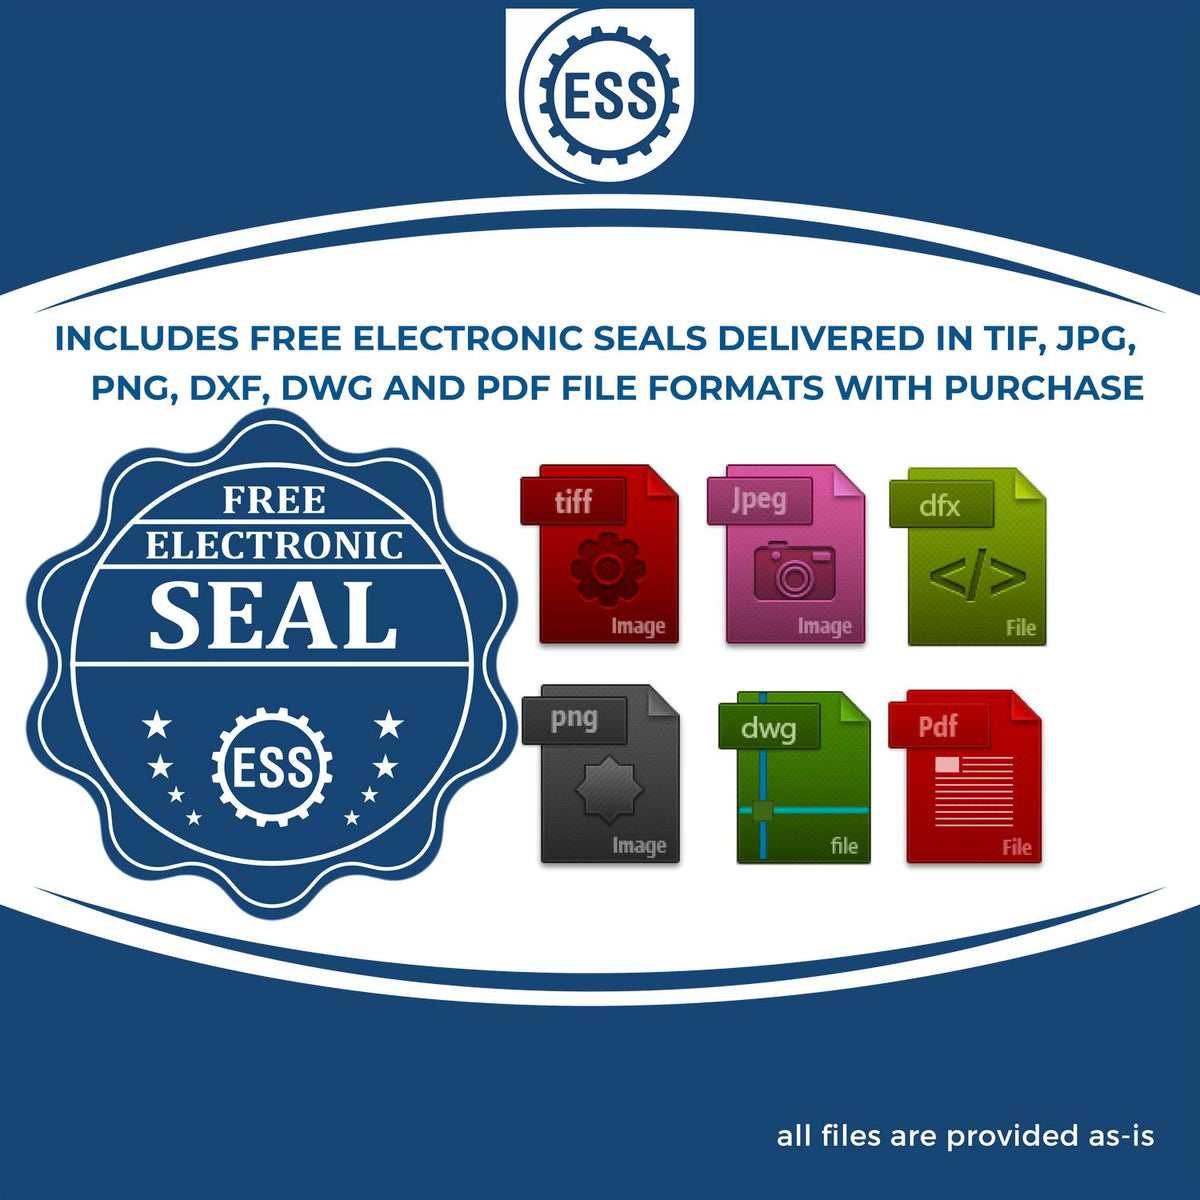 An infographic for the free electronic seal for the State of Kentucky Extended Long Reach Geologist Seal illustrating the different file type icons such as DXF, DWG, TIF, JPG and PNG.